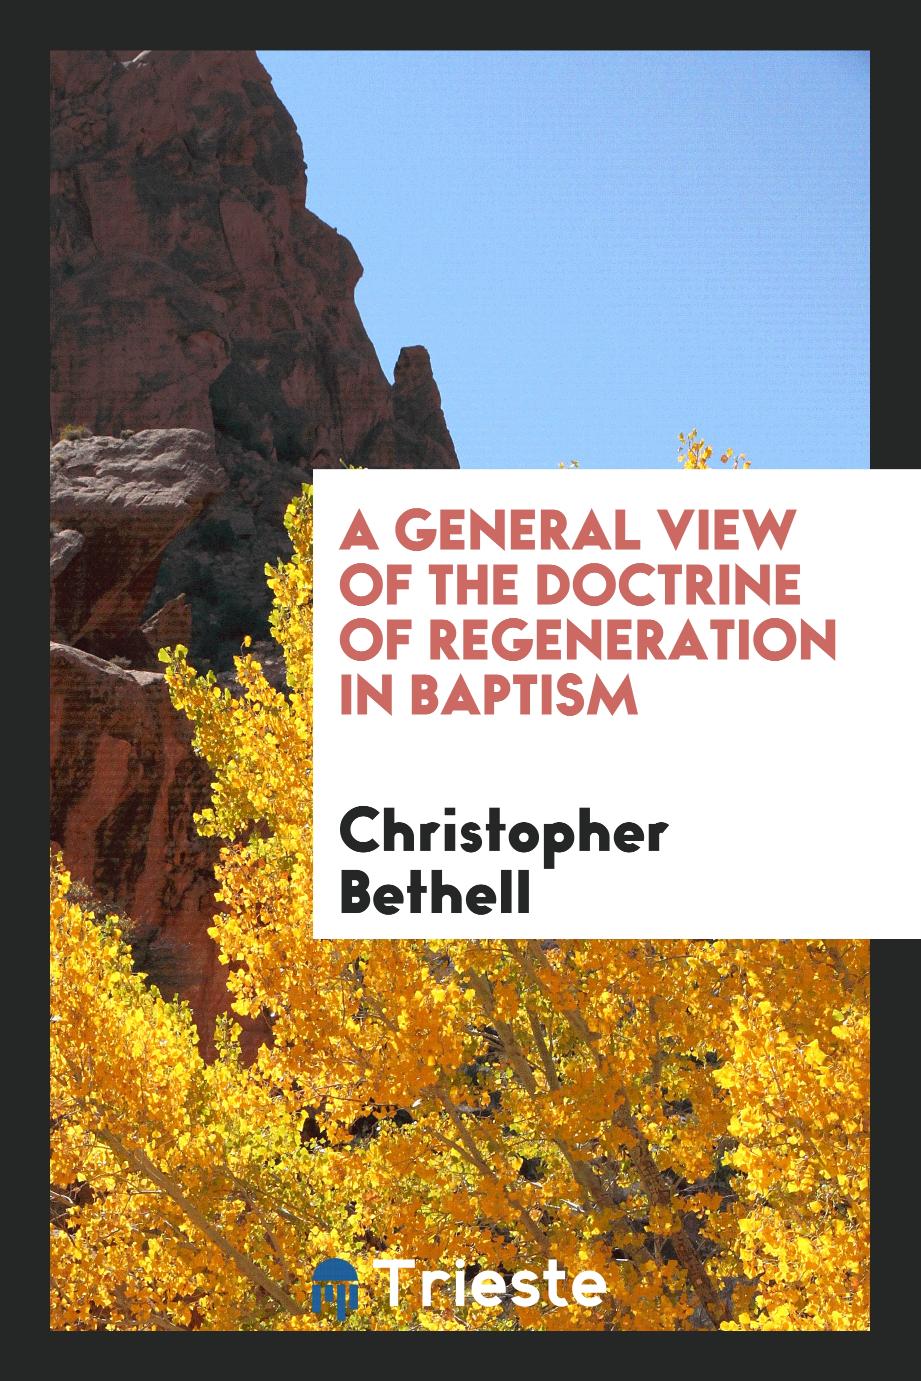 A General View of the Doctrine of Regeneration in Baptism